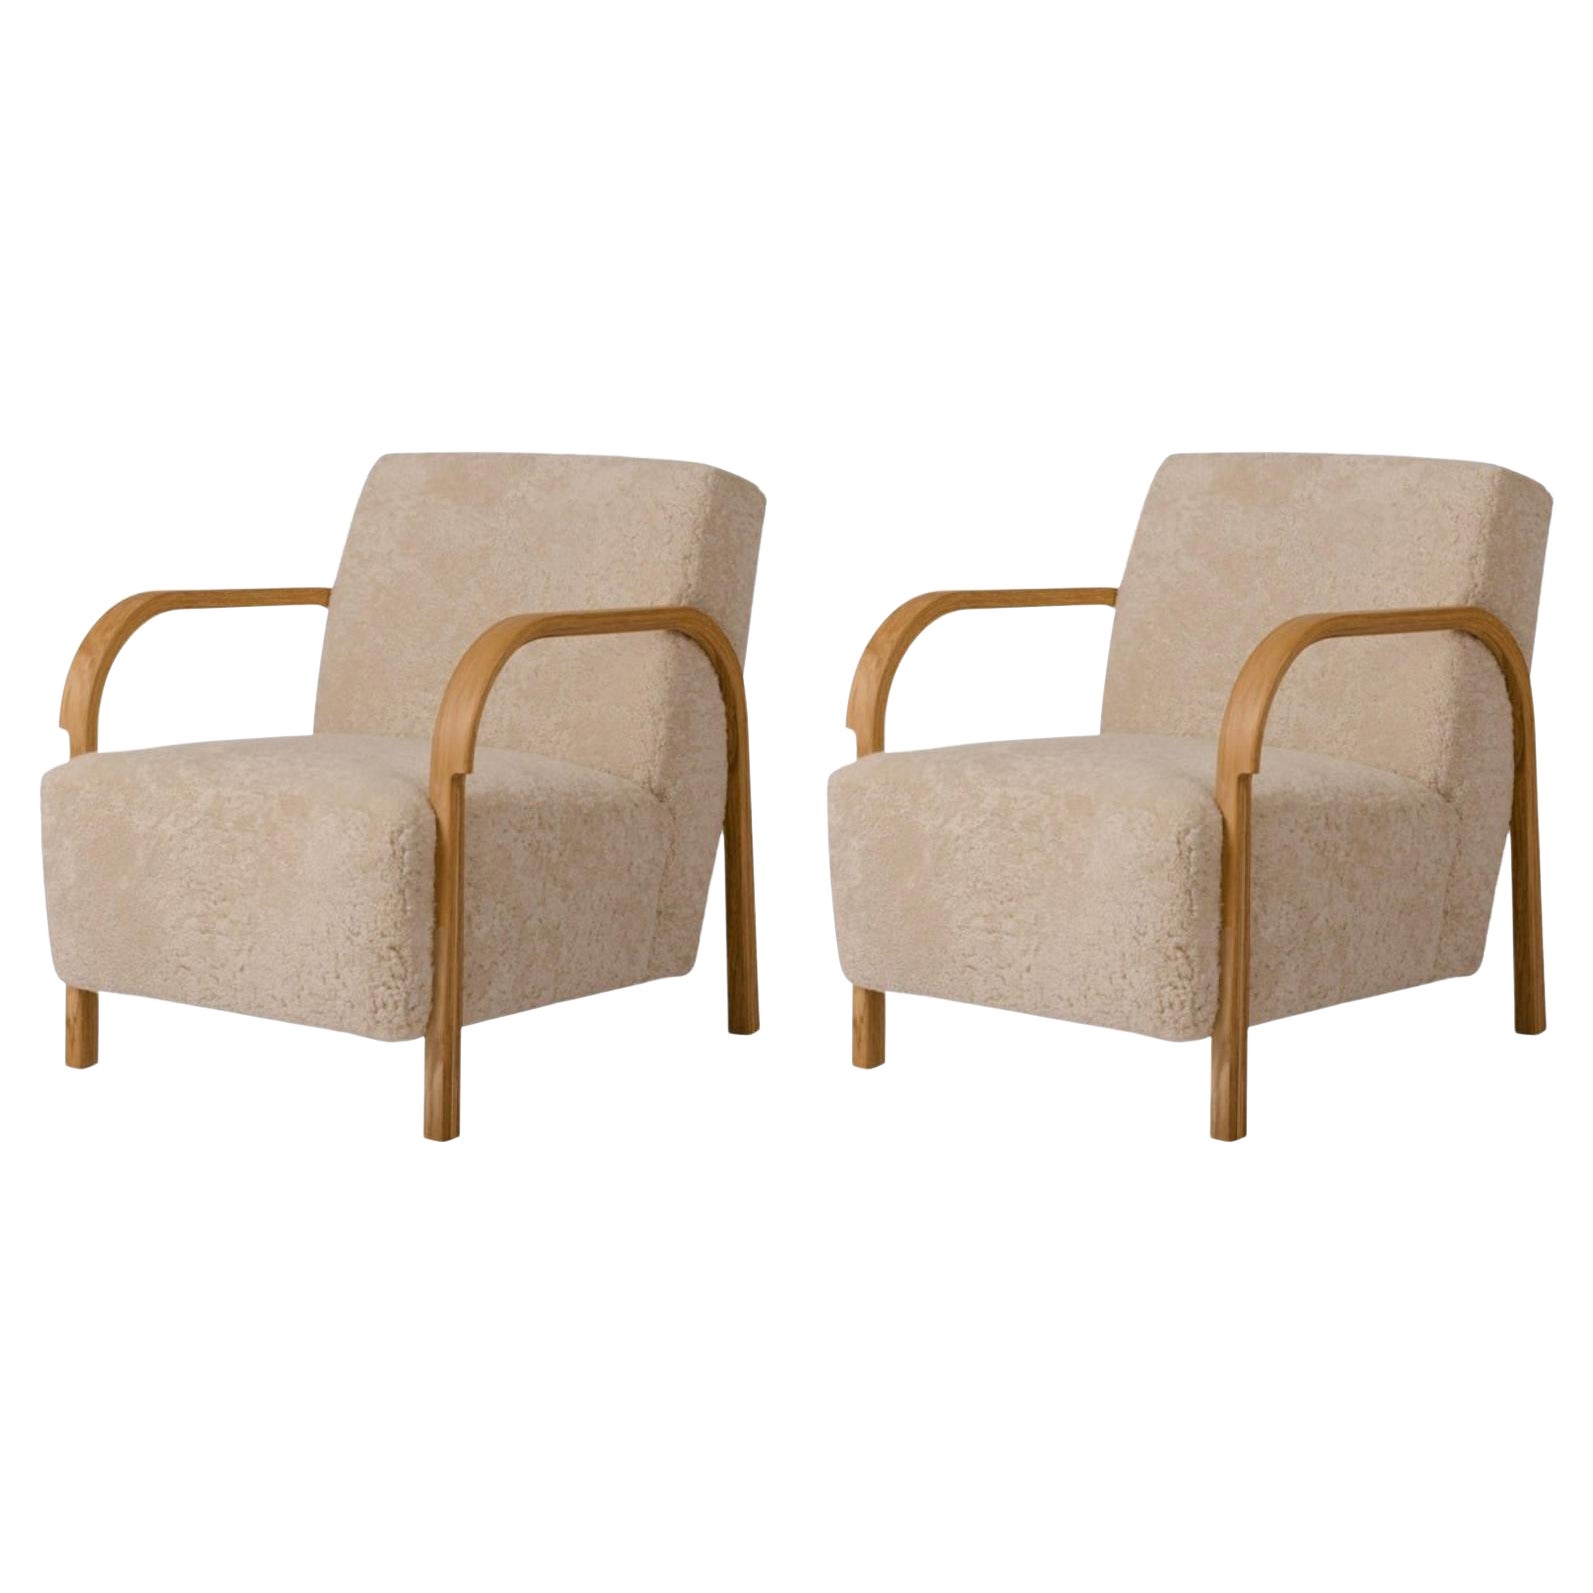 Set of 2 Sheepskin Arch Lounge Chairs by Mazo Design For Sale